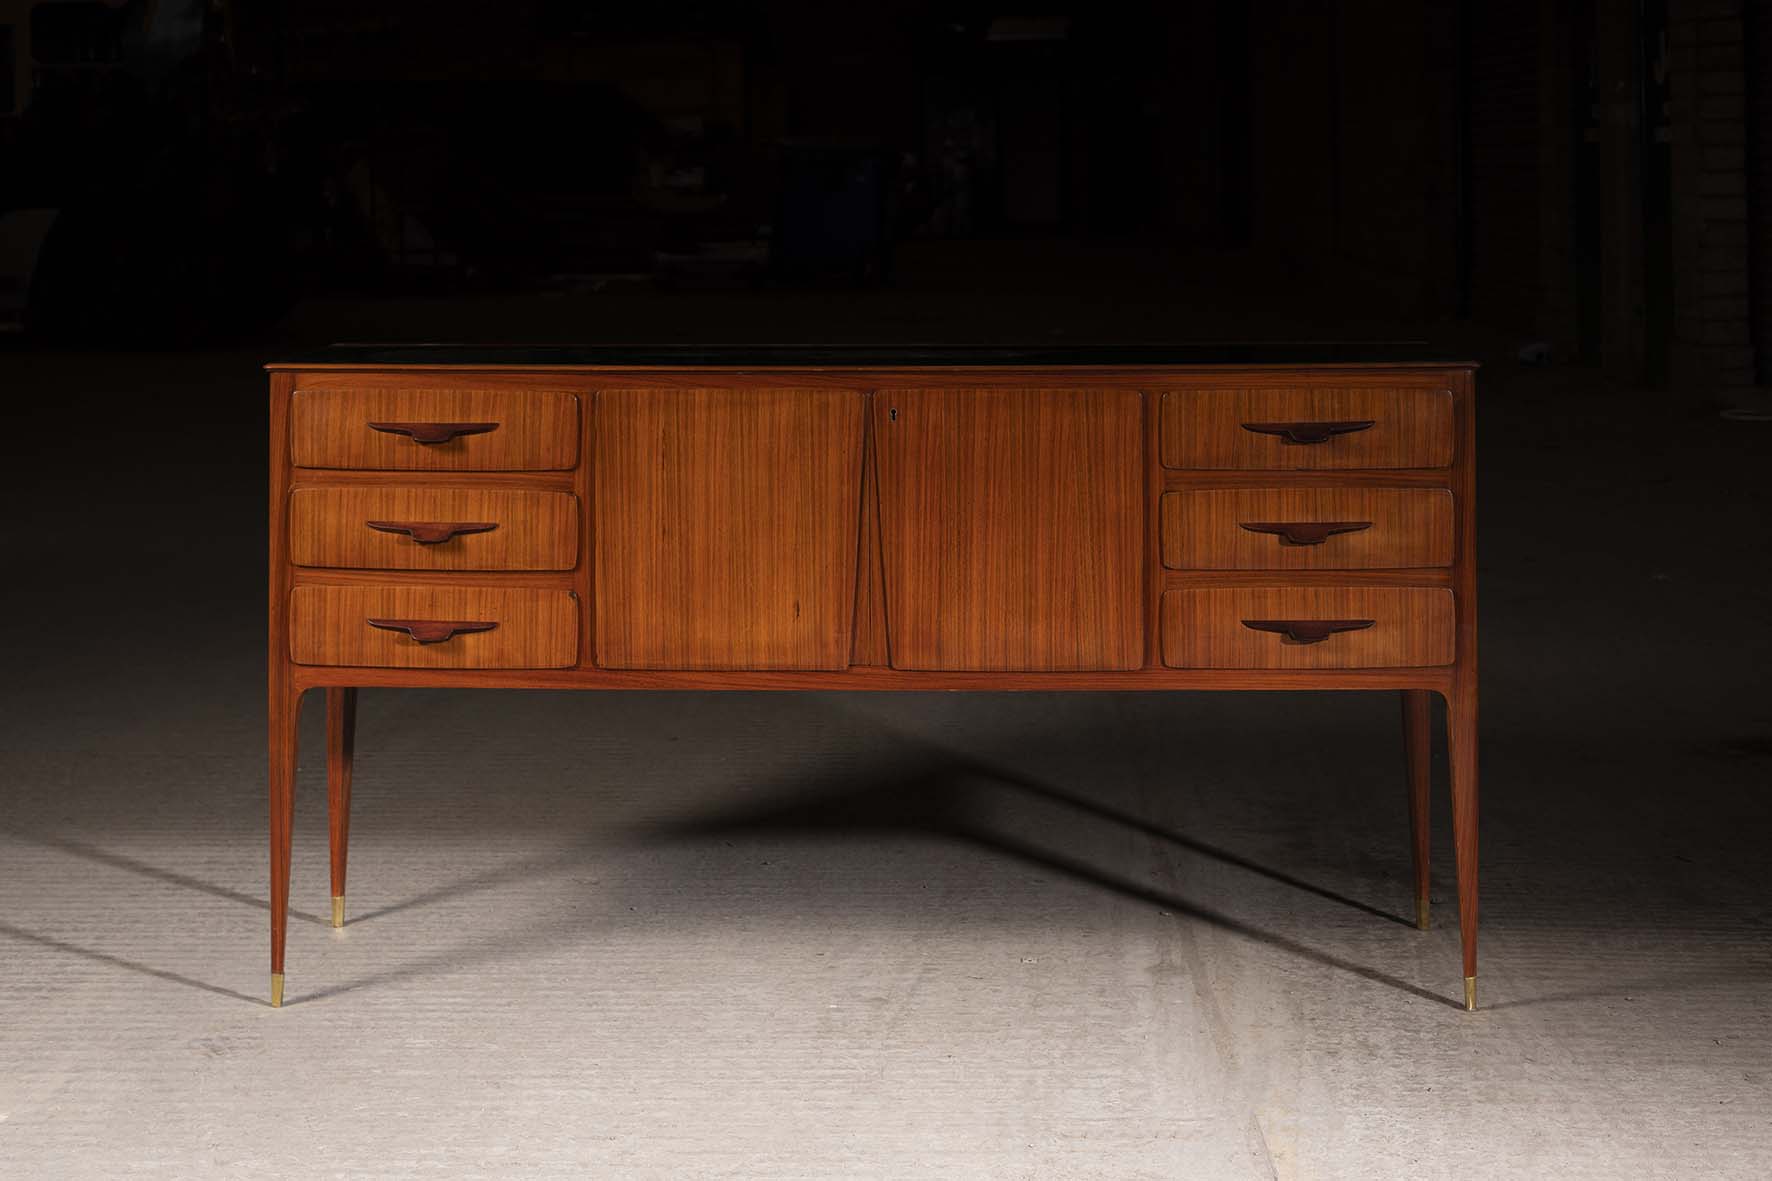 A FINE ROSEWOOD COCKTAIL CABINET, ITALIAN, c.1960, attributed to Vittorio Dassi, with a pair of